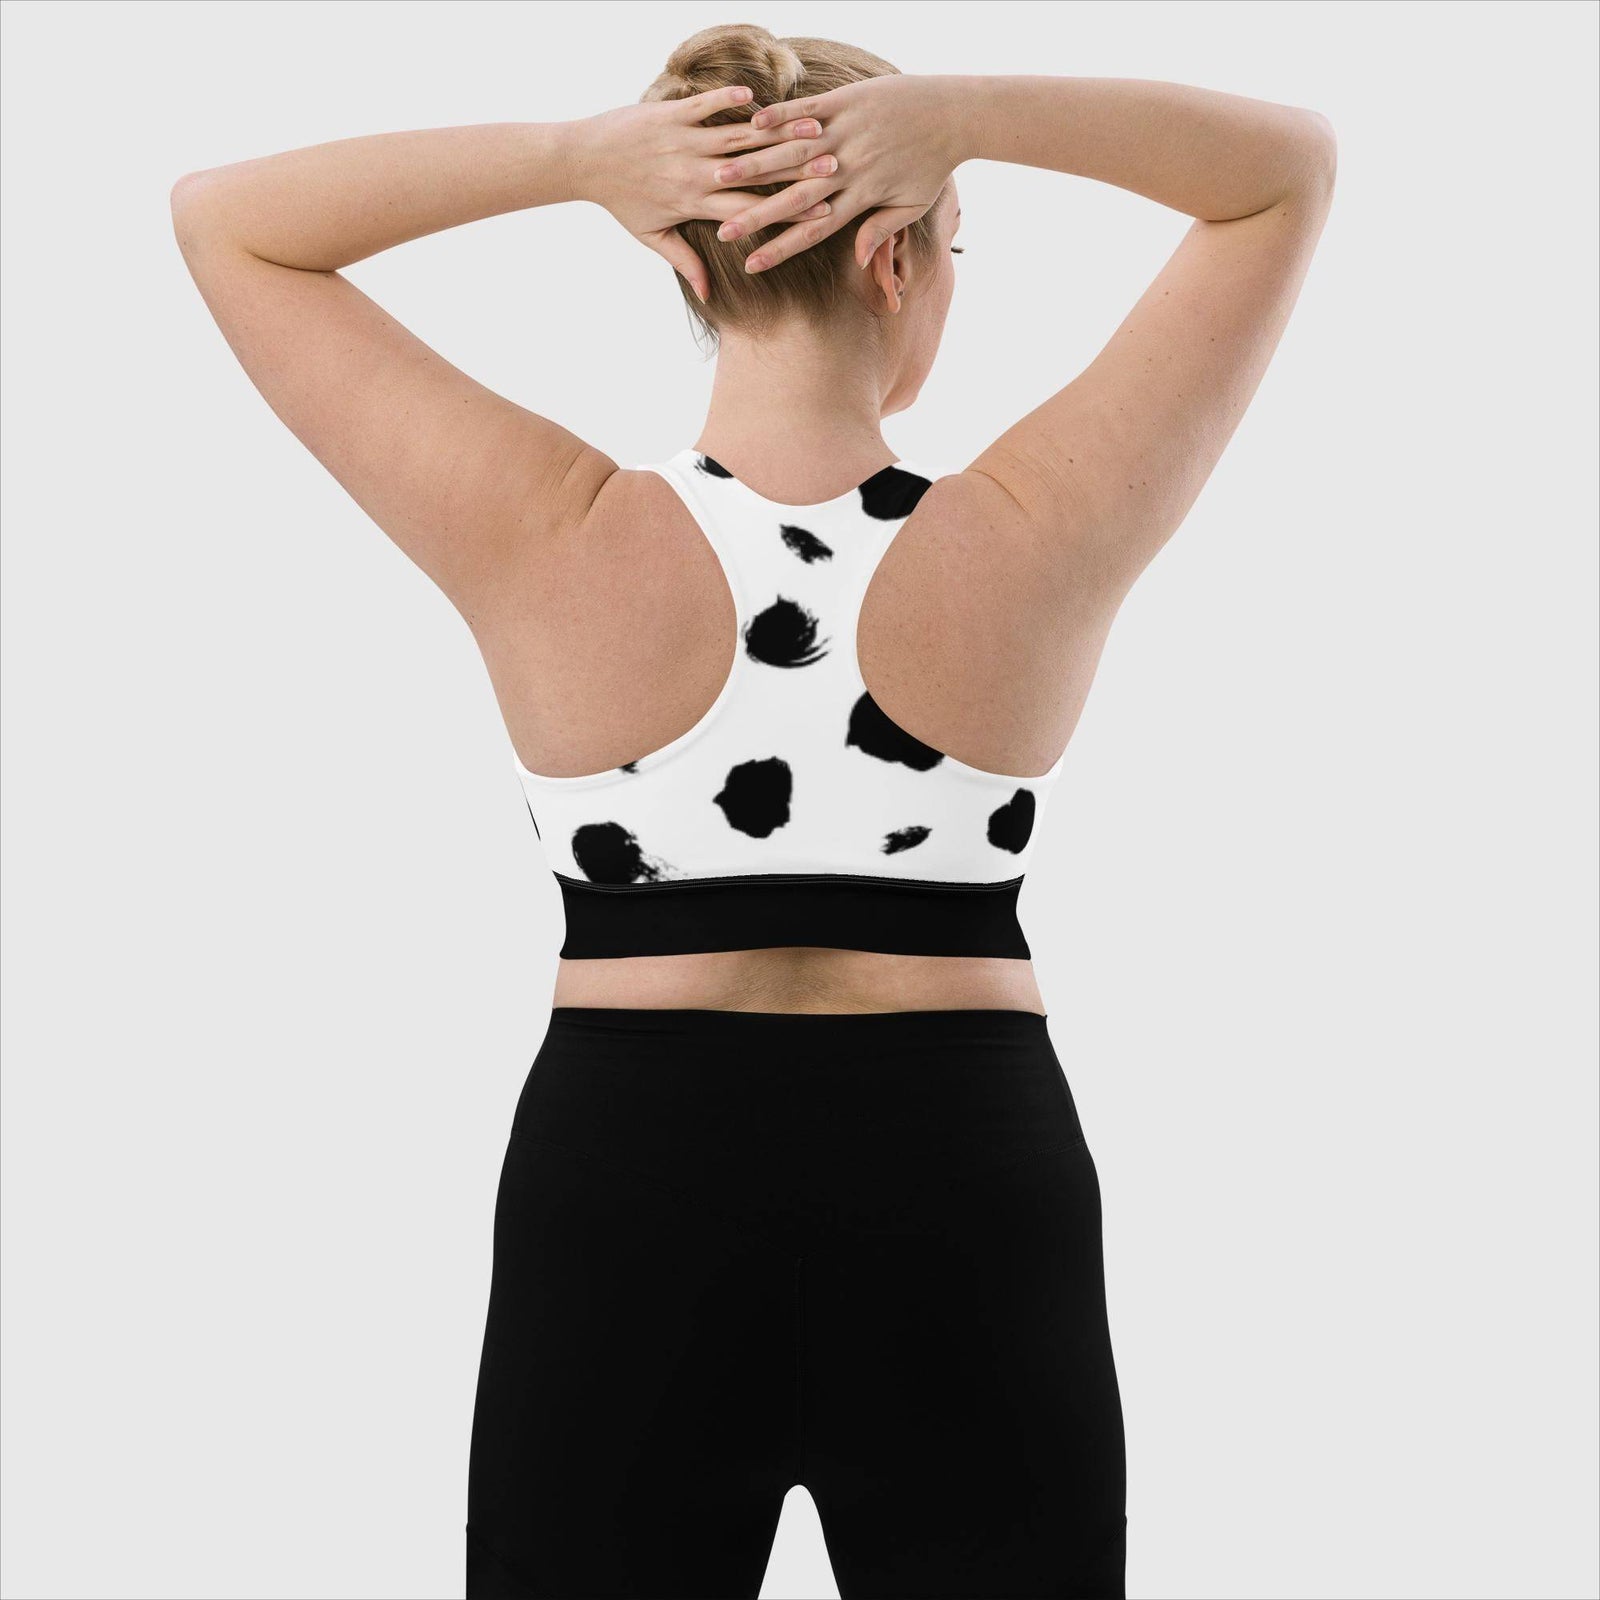 Black and White Longline Sports Bra - Revive Wear     Stay comfortable and confident during any workout with our Longline Sports Bra. Made with a supportive fit and moisture-wicking fabric, this bra is perfect for any level of intensity.